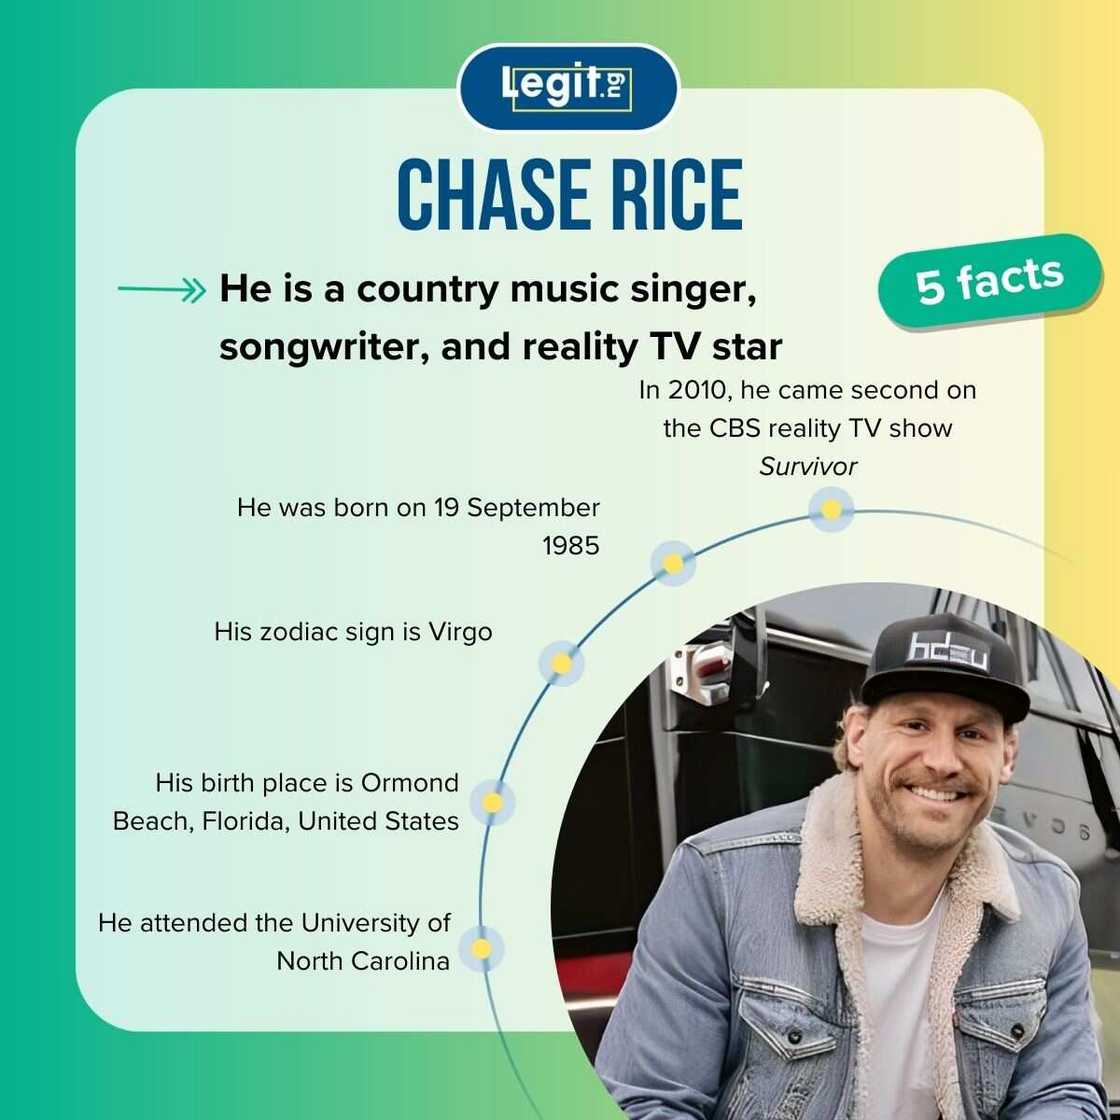 Fast facts about Chase Rise